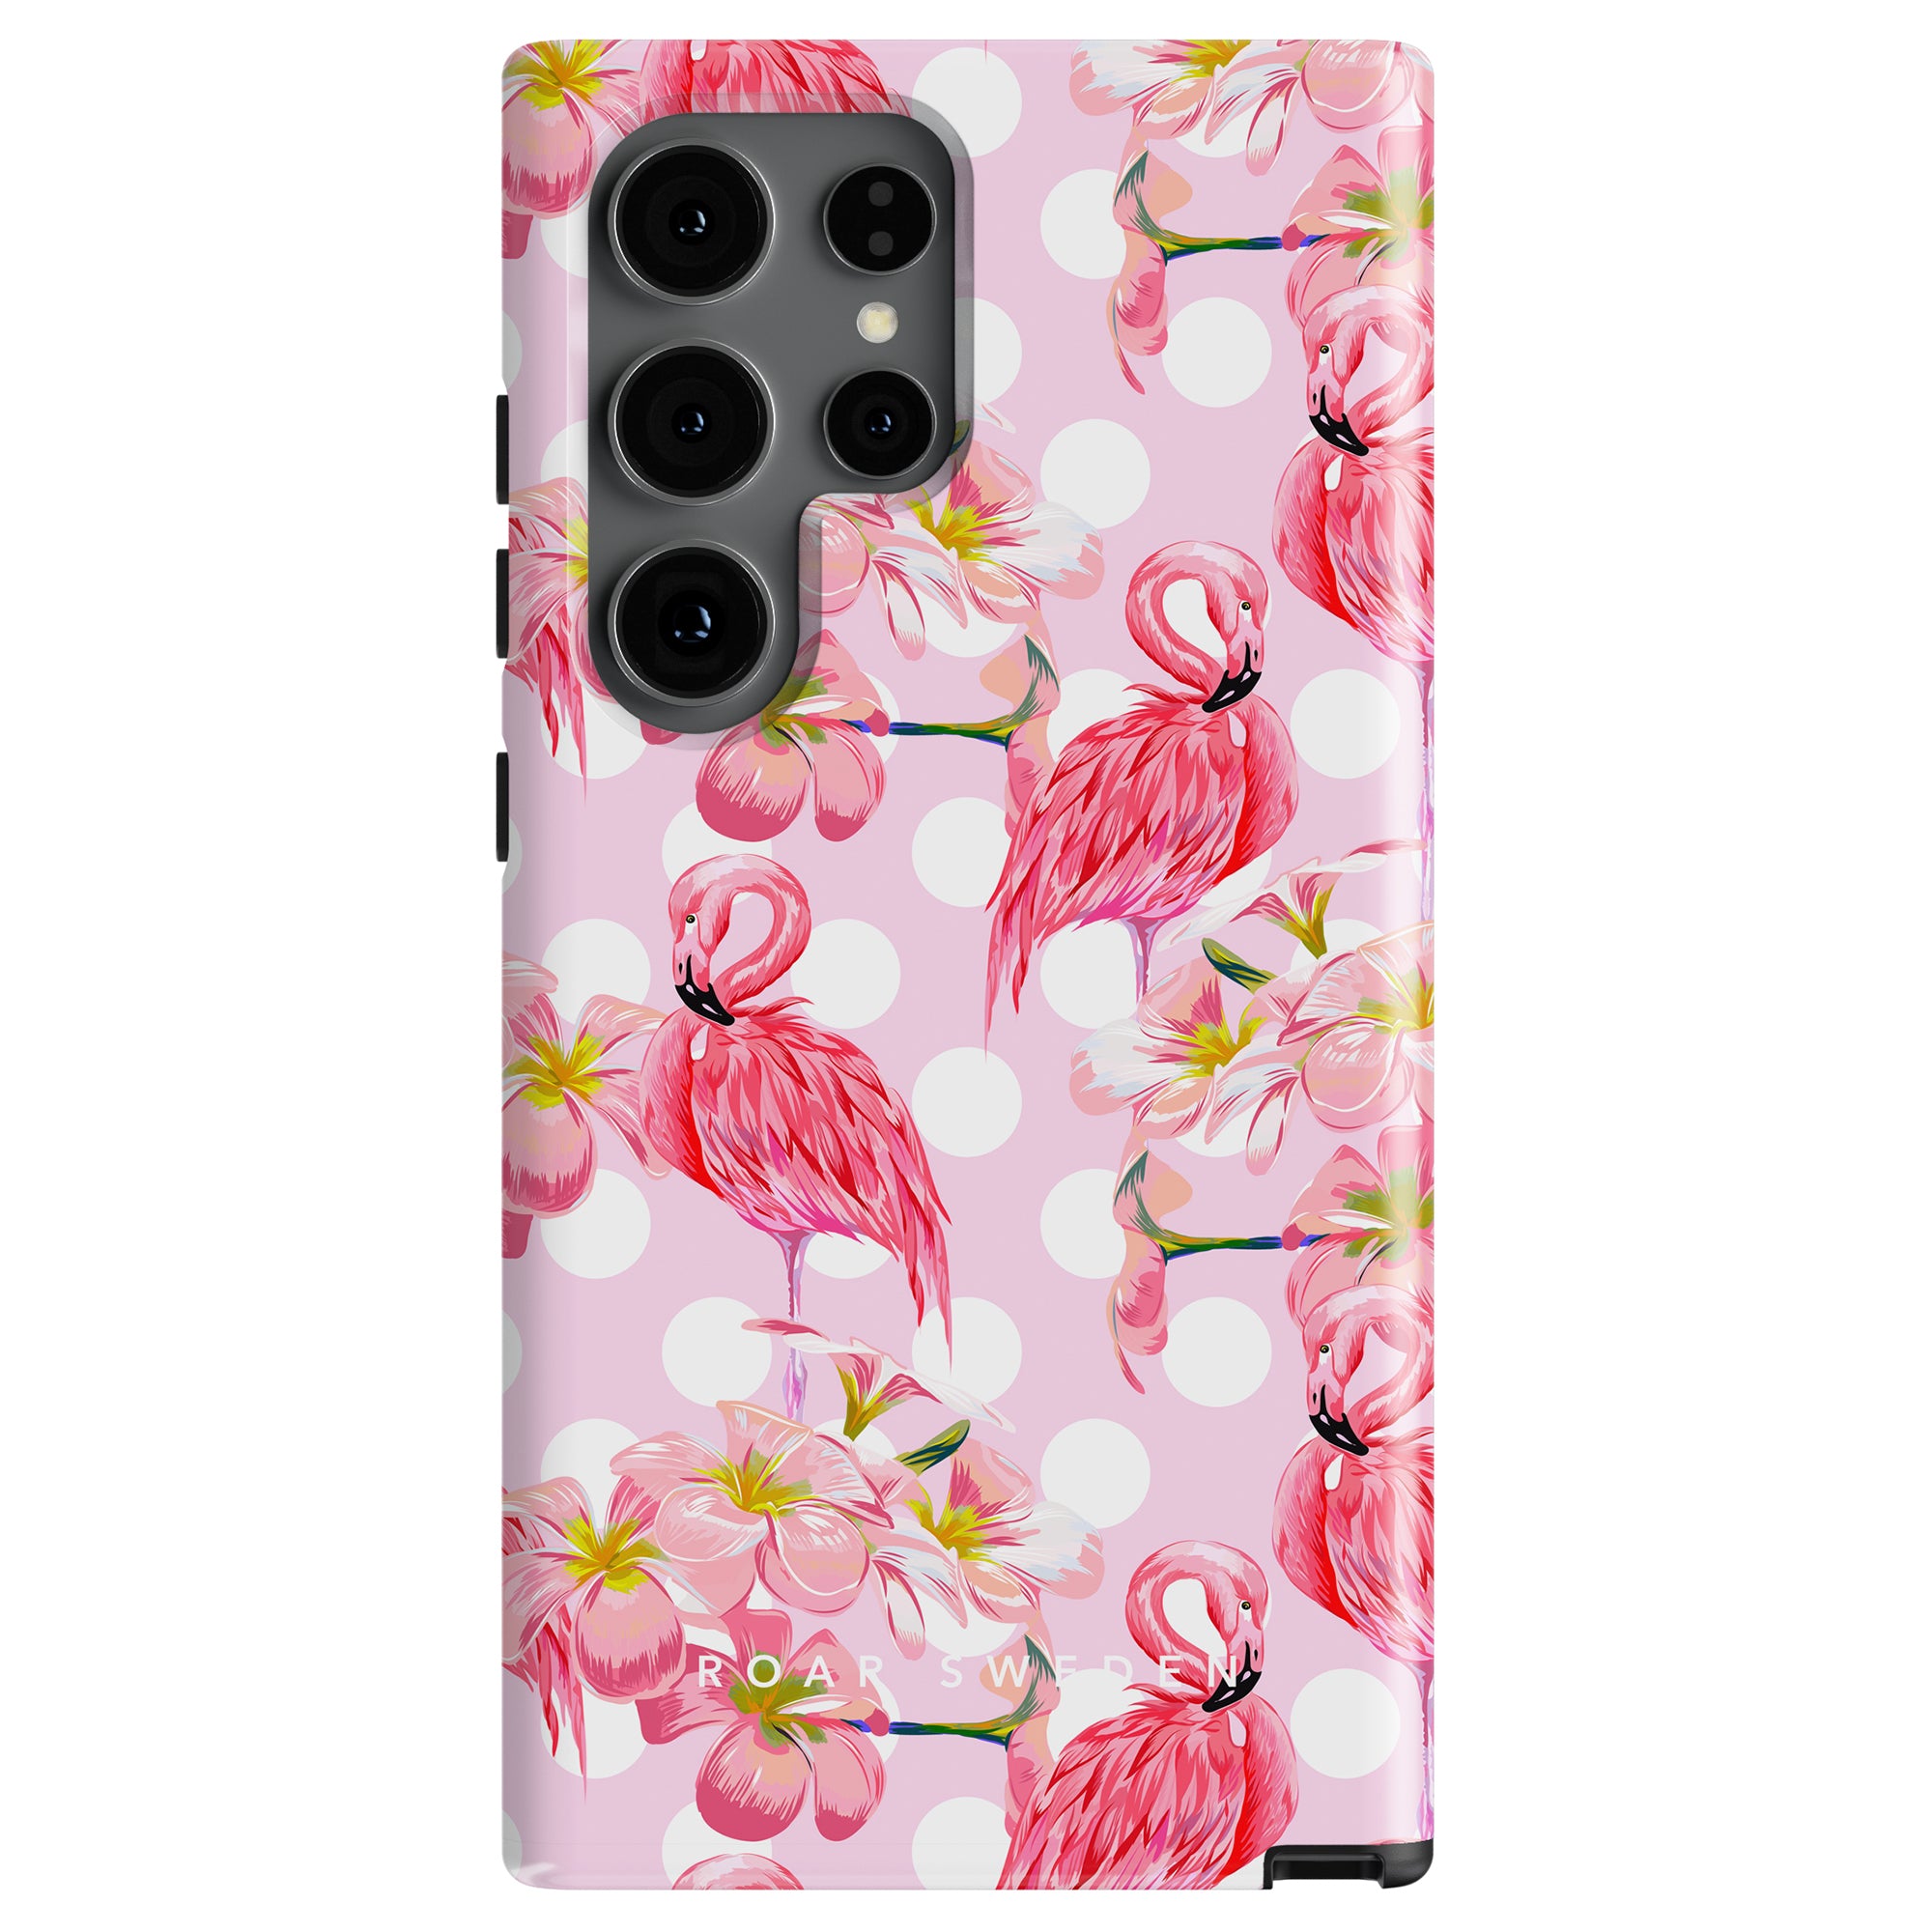 Introducing the Perry - Tough case: a phone case featuring a pattern of pink flamingos, tropical fruits, and flowers on a light rosa pastell background with white polka dots.